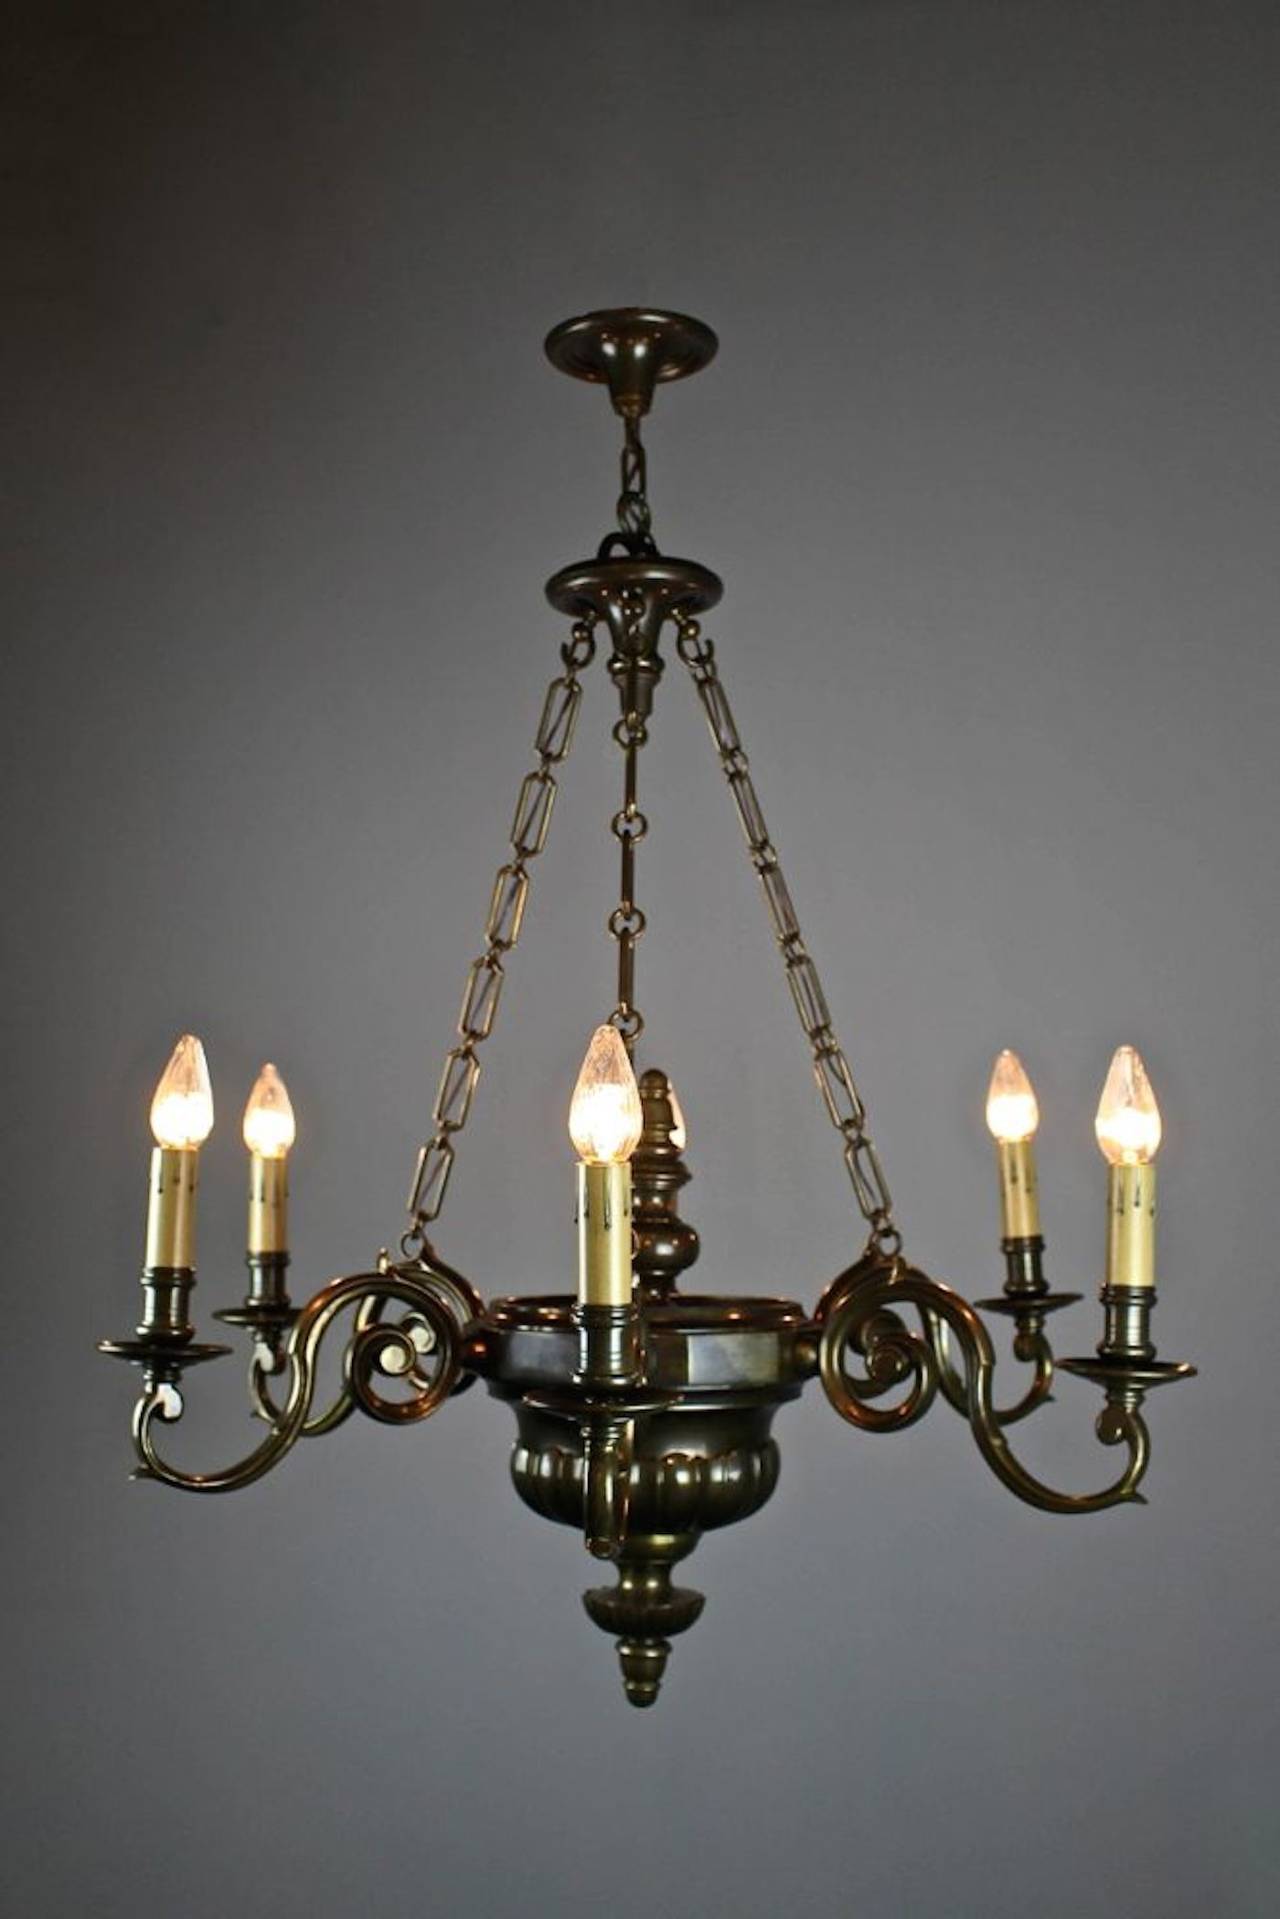 Edwardian Large Sheffield Style Lighting Fixture with Candle Arms (6-light) For Sale